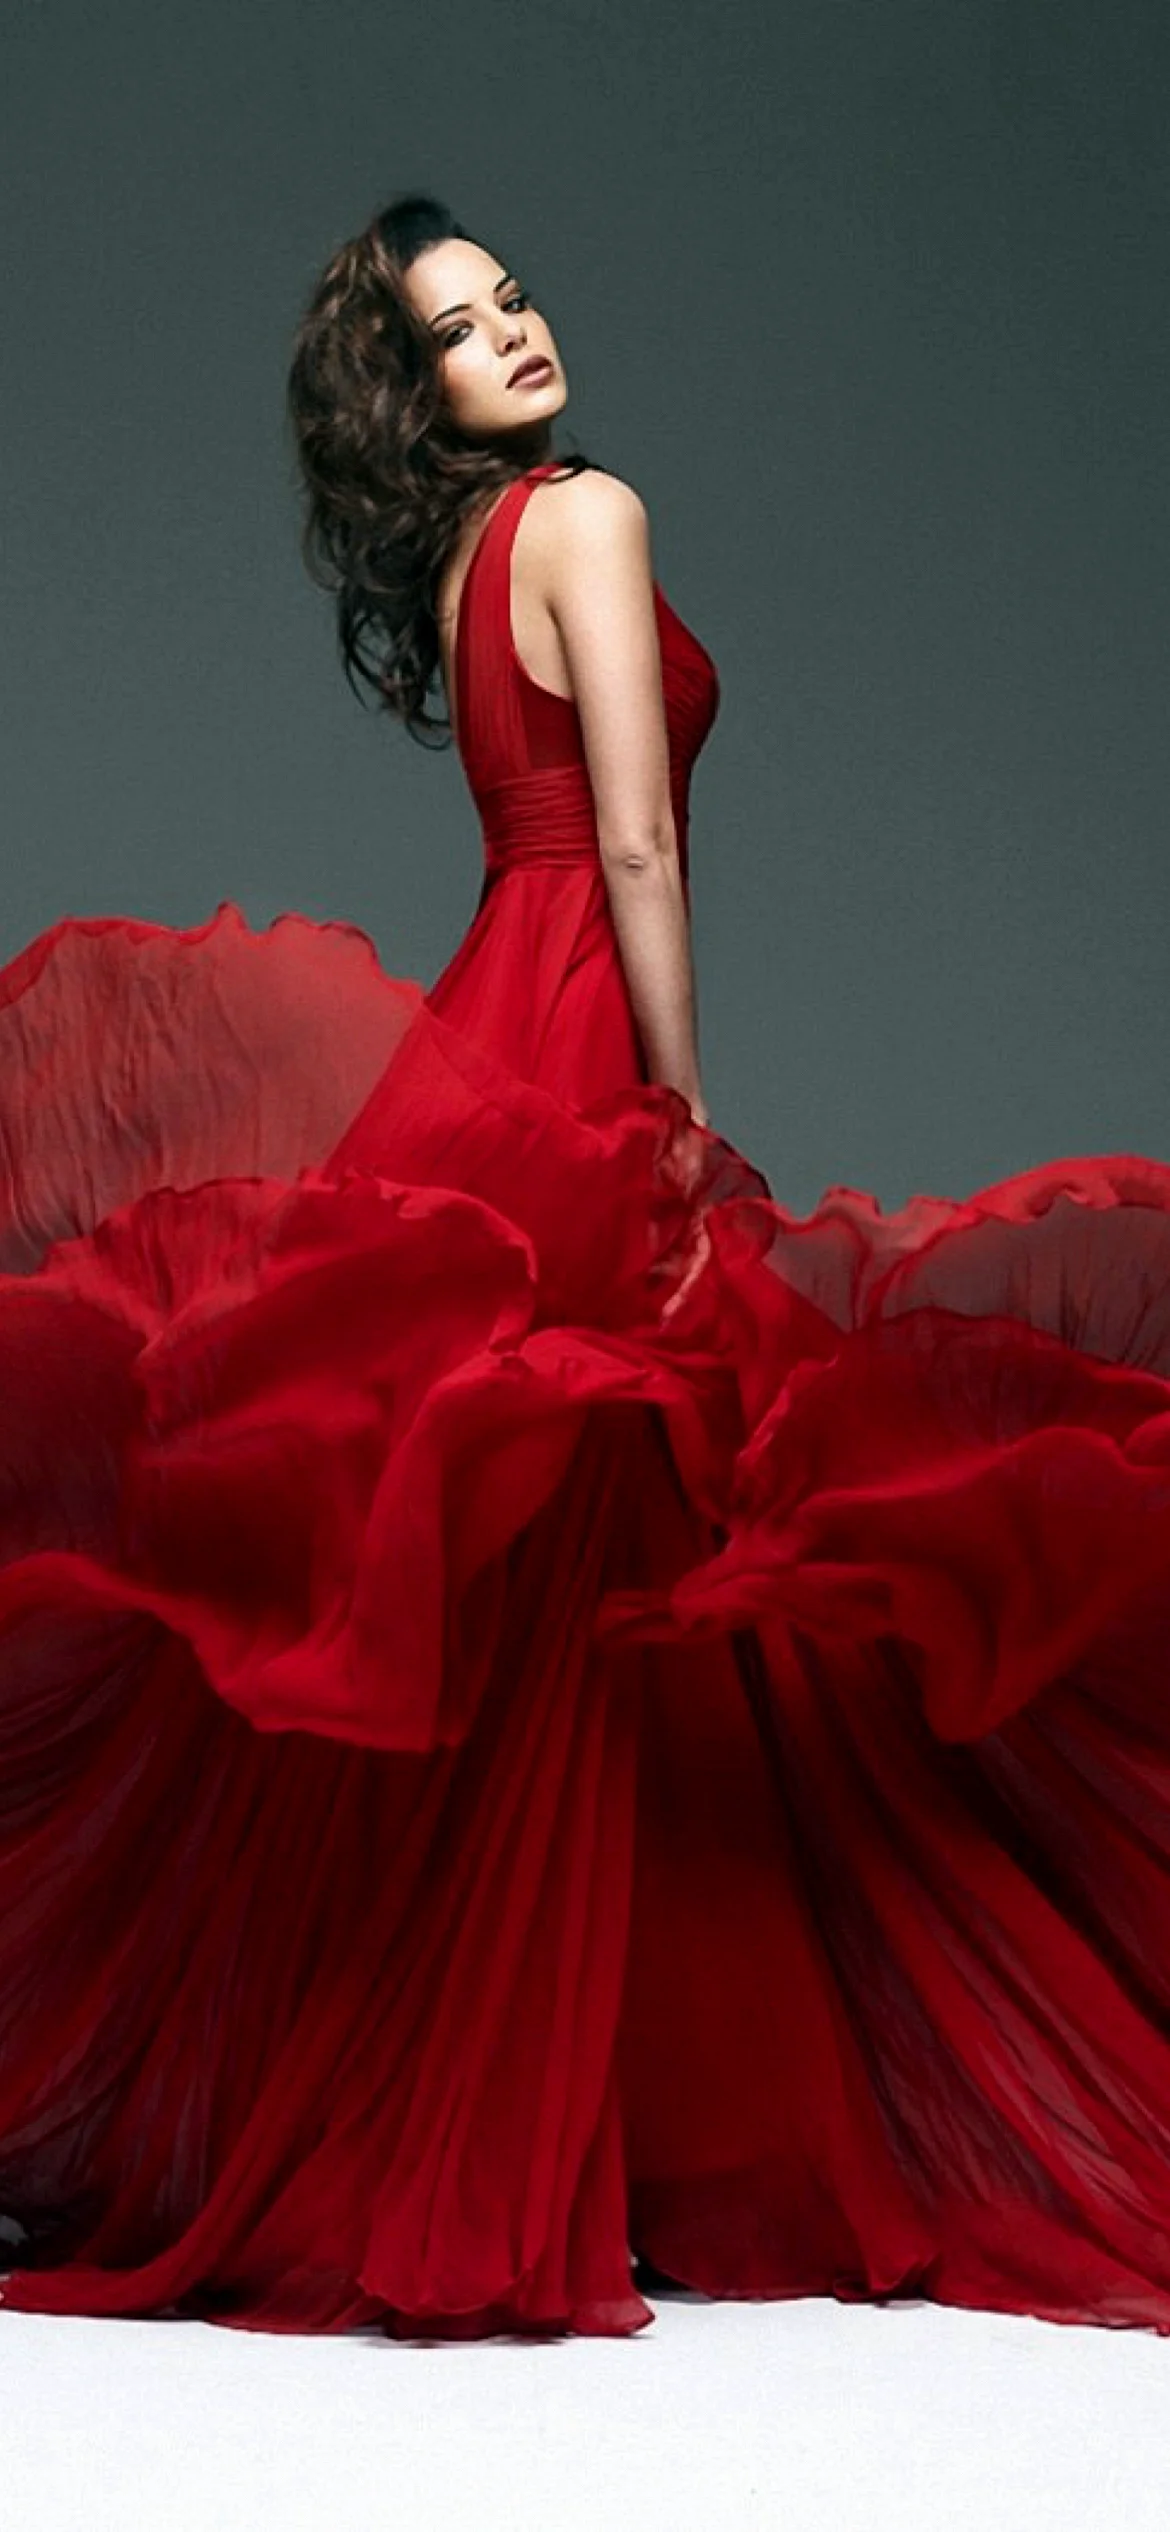 Red Dress Wallpaper for iPhone 12